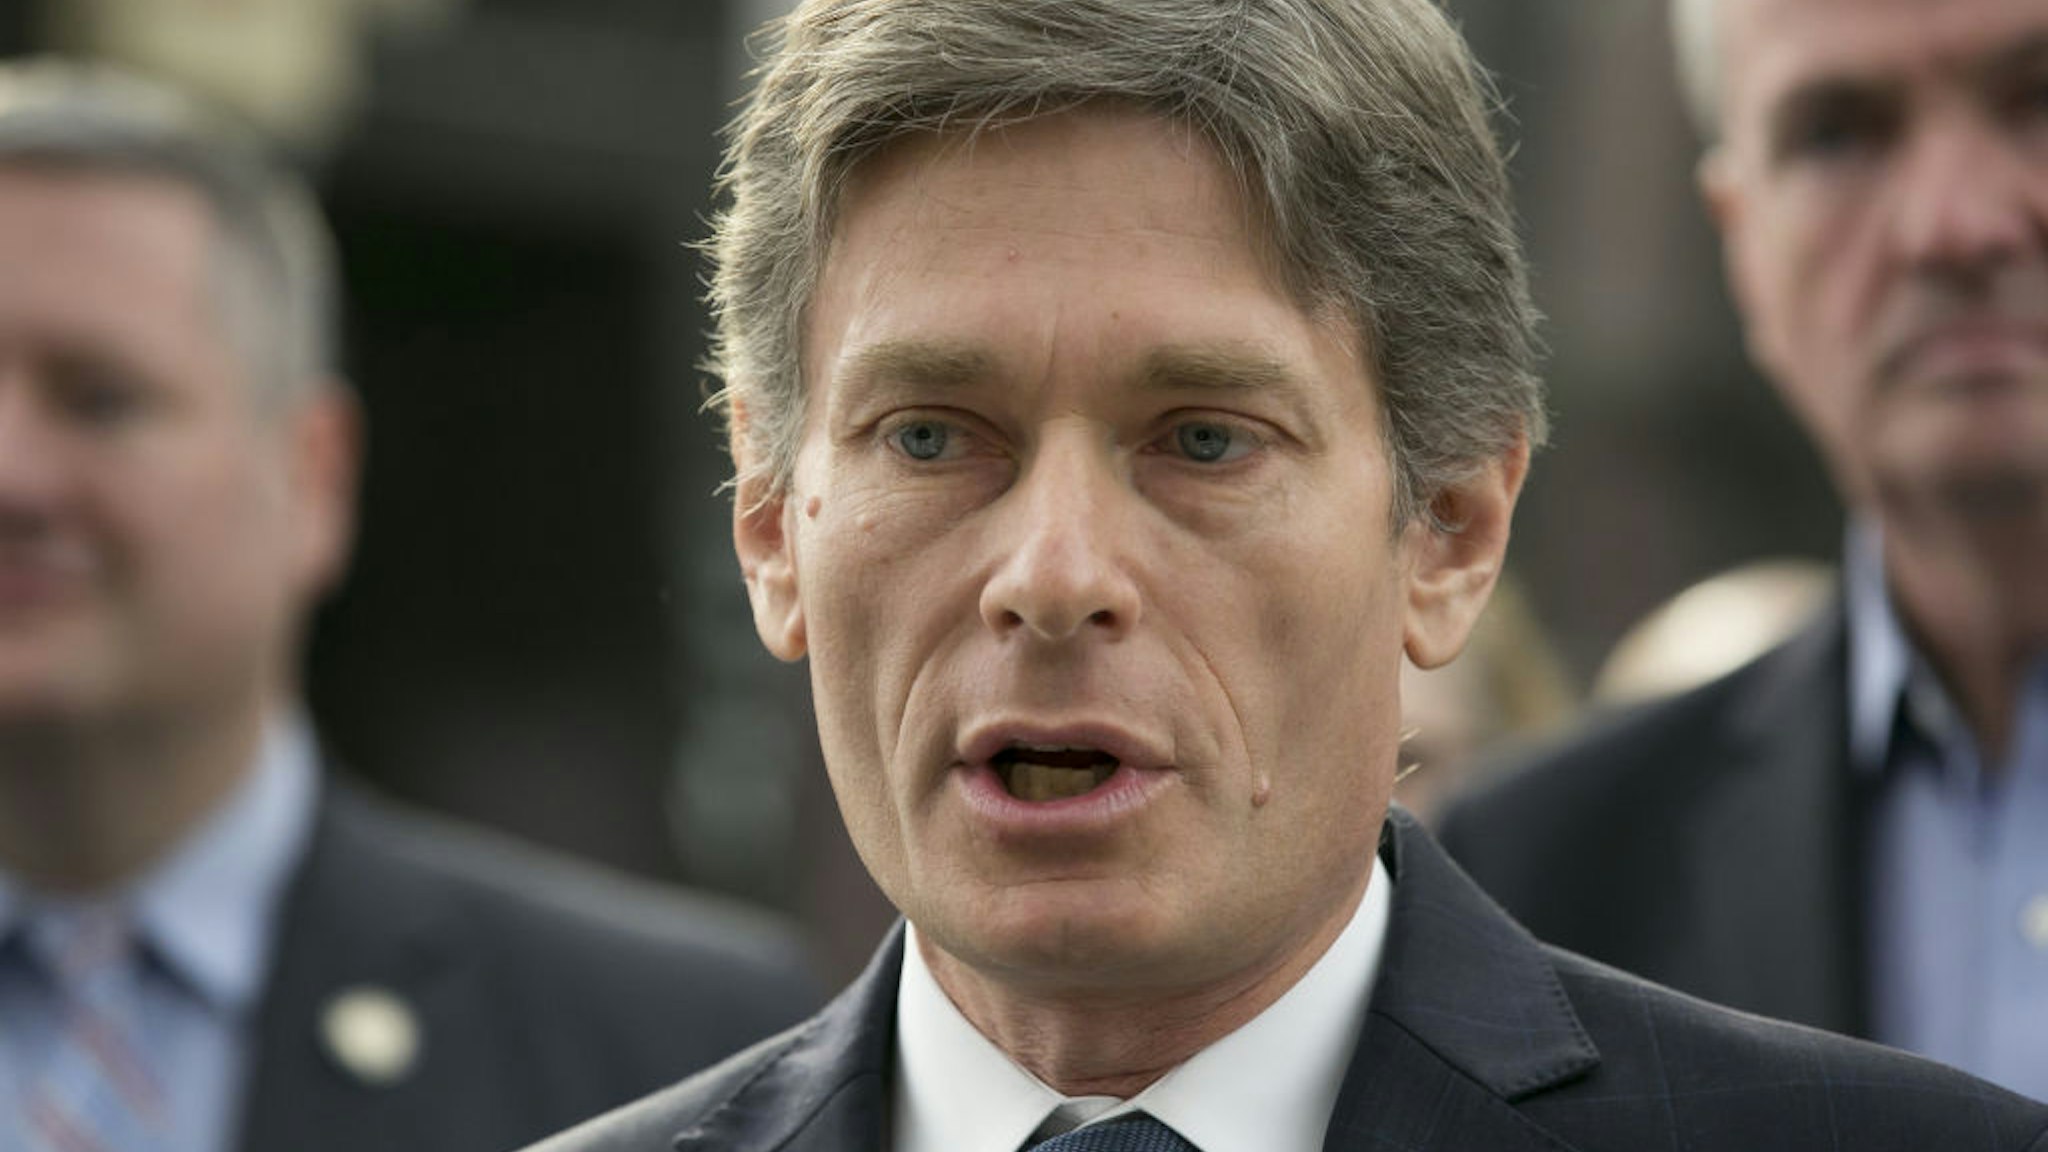 Tom Malinowski speaks during a news conference before the signing of a NJ Transit reform bill